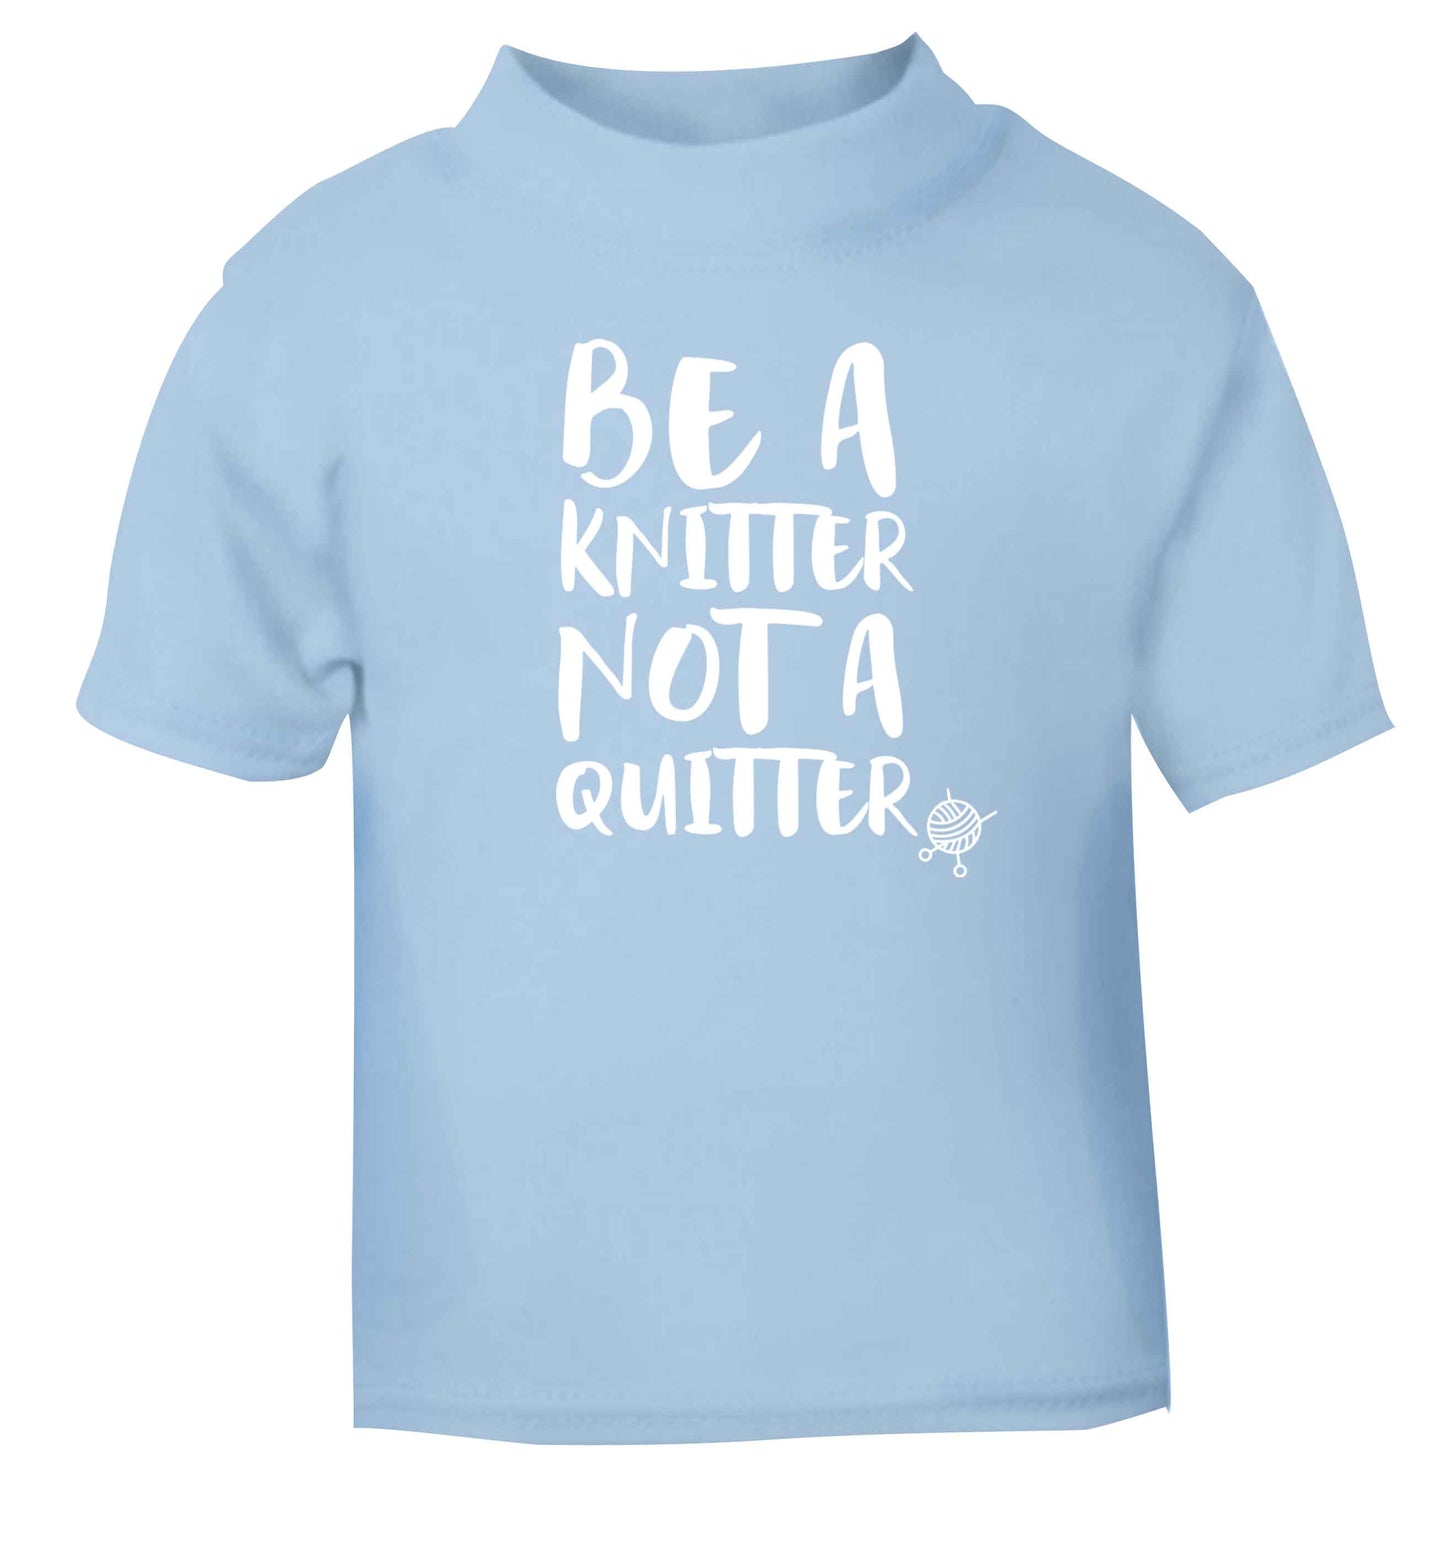 Be a knitter not a quitter light blue Baby Toddler Tshirt 2 Years